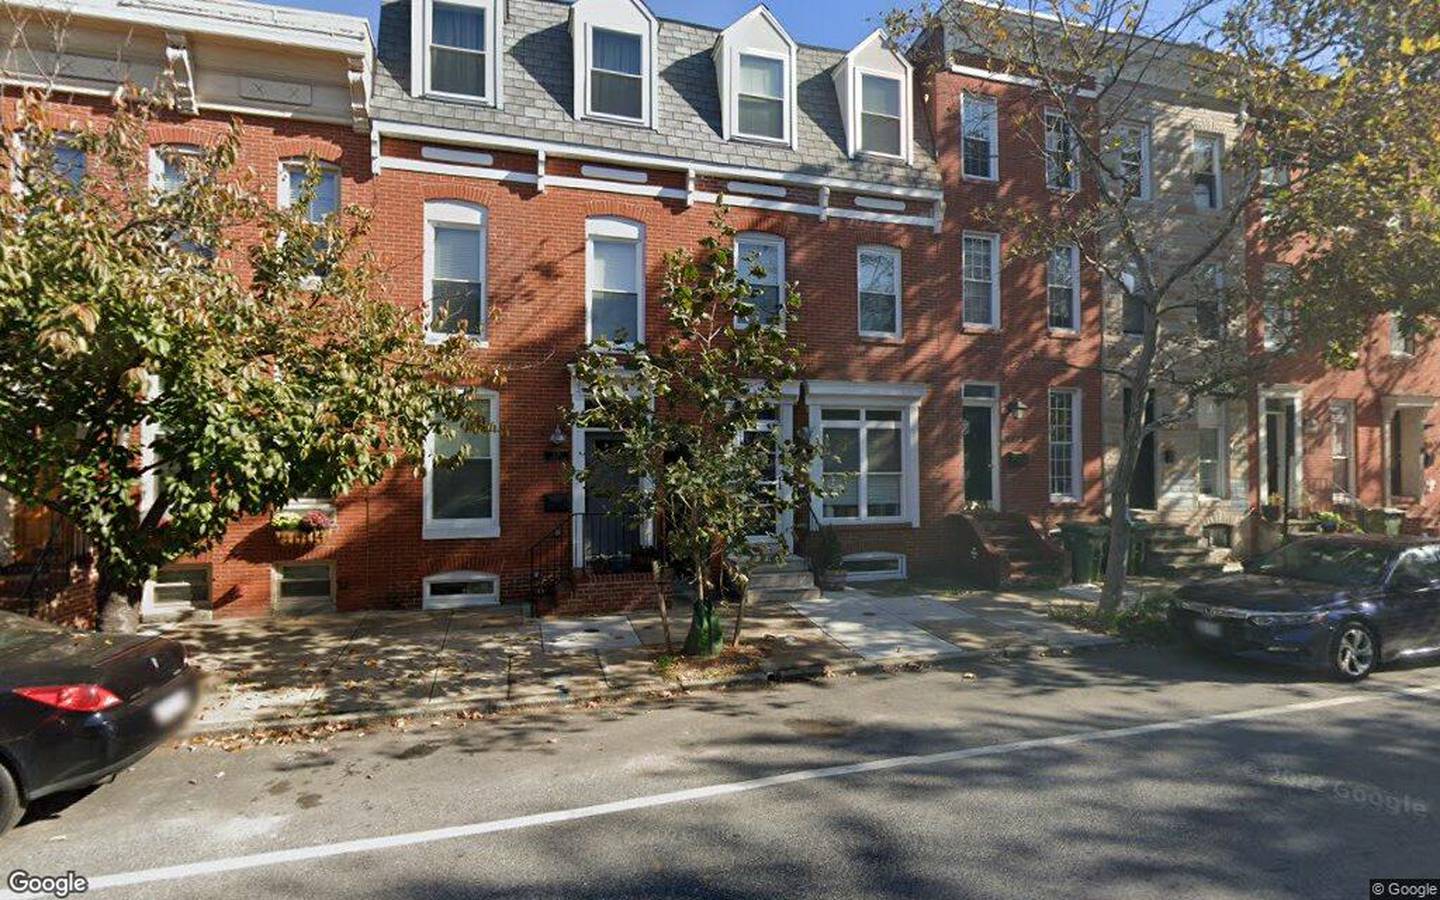 $549,900, townhouse at 1527 Hanover Street 